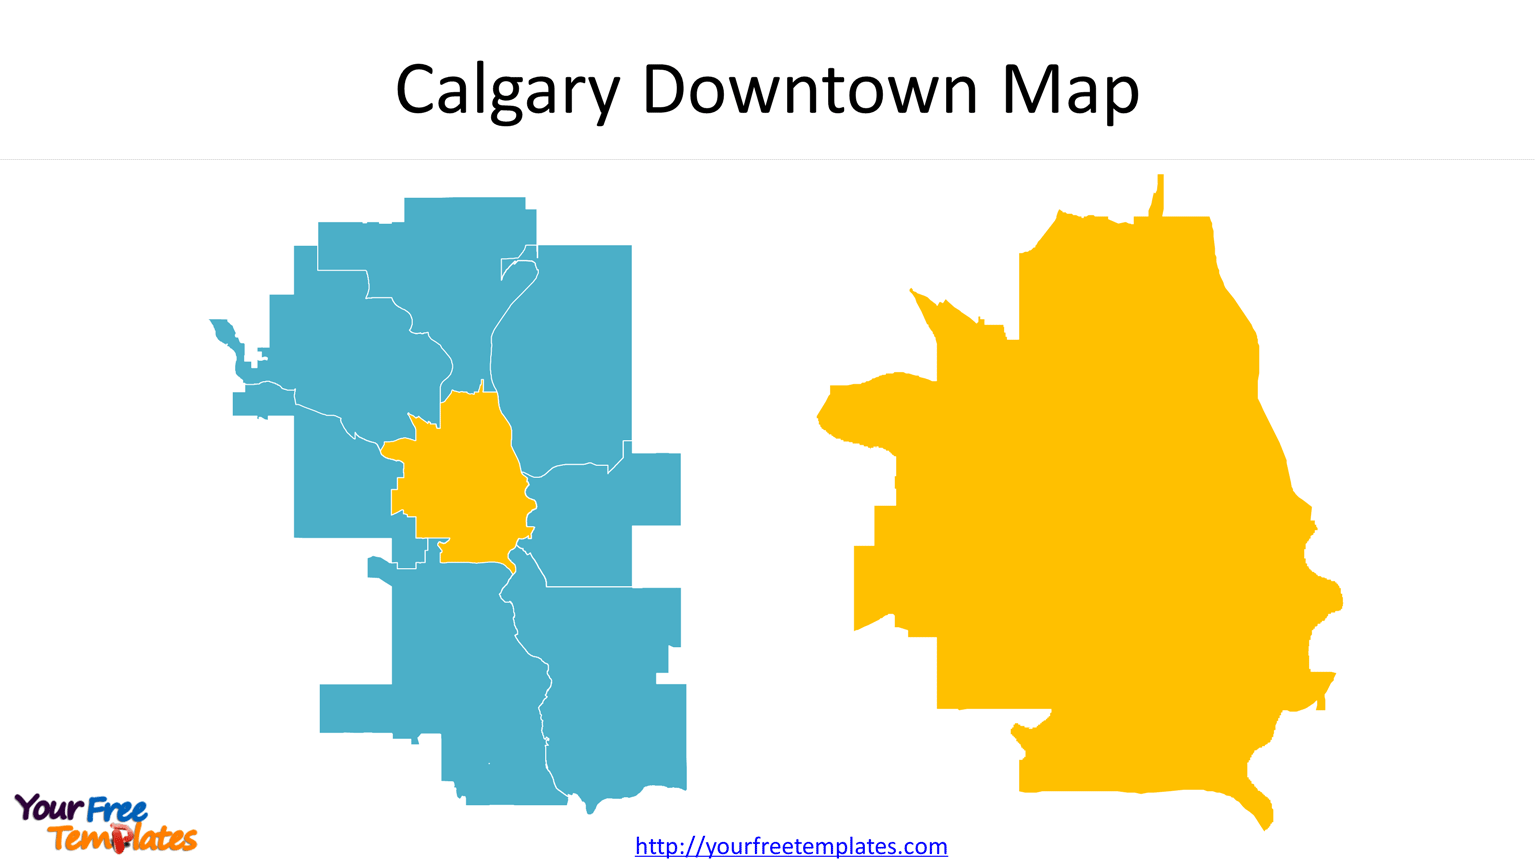 Downtown Calgary Map on the central sector of Calgary.